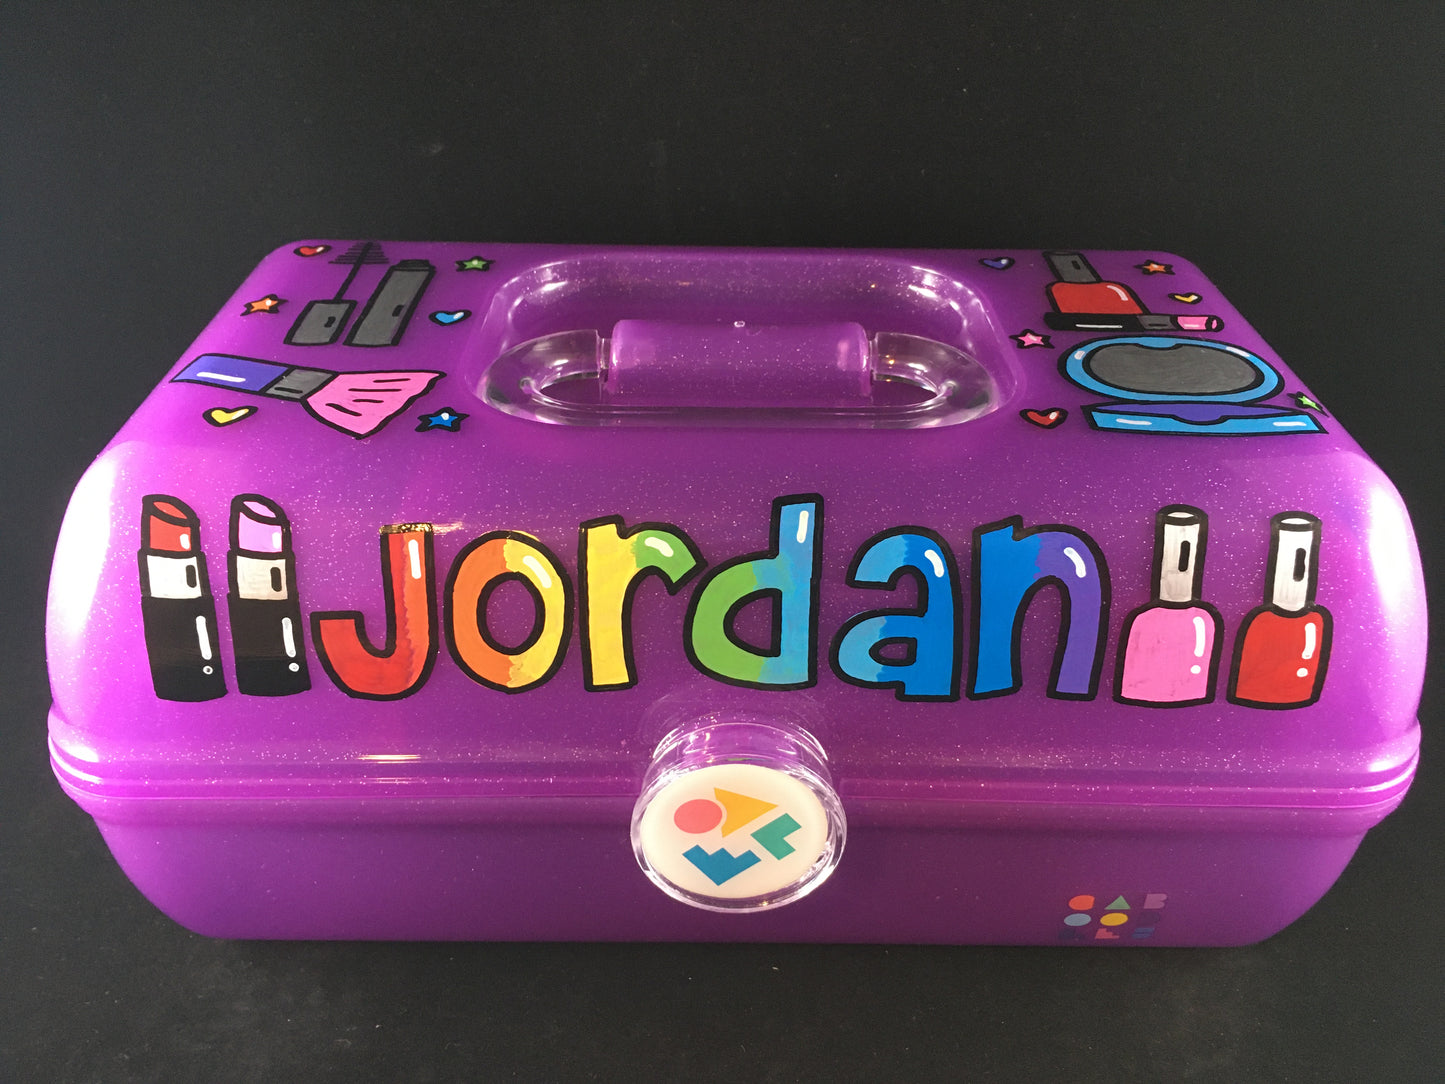 Makeup Theme Personalized Hand-painted Caboodle